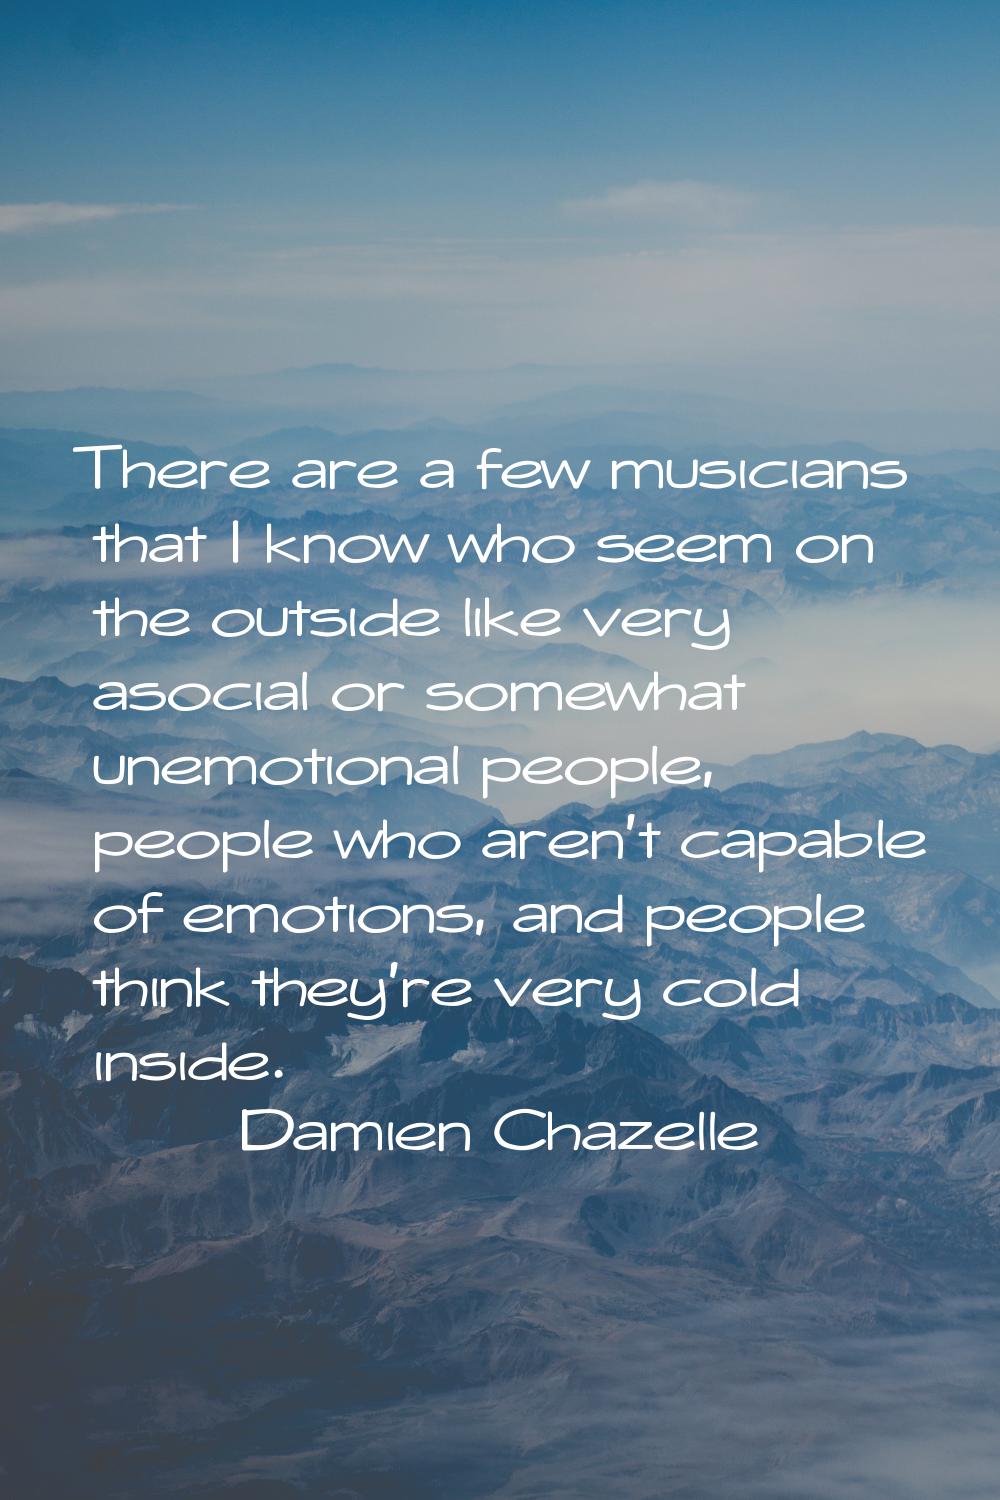 There are a few musicians that I know who seem on the outside like very asocial or somewhat unemoti